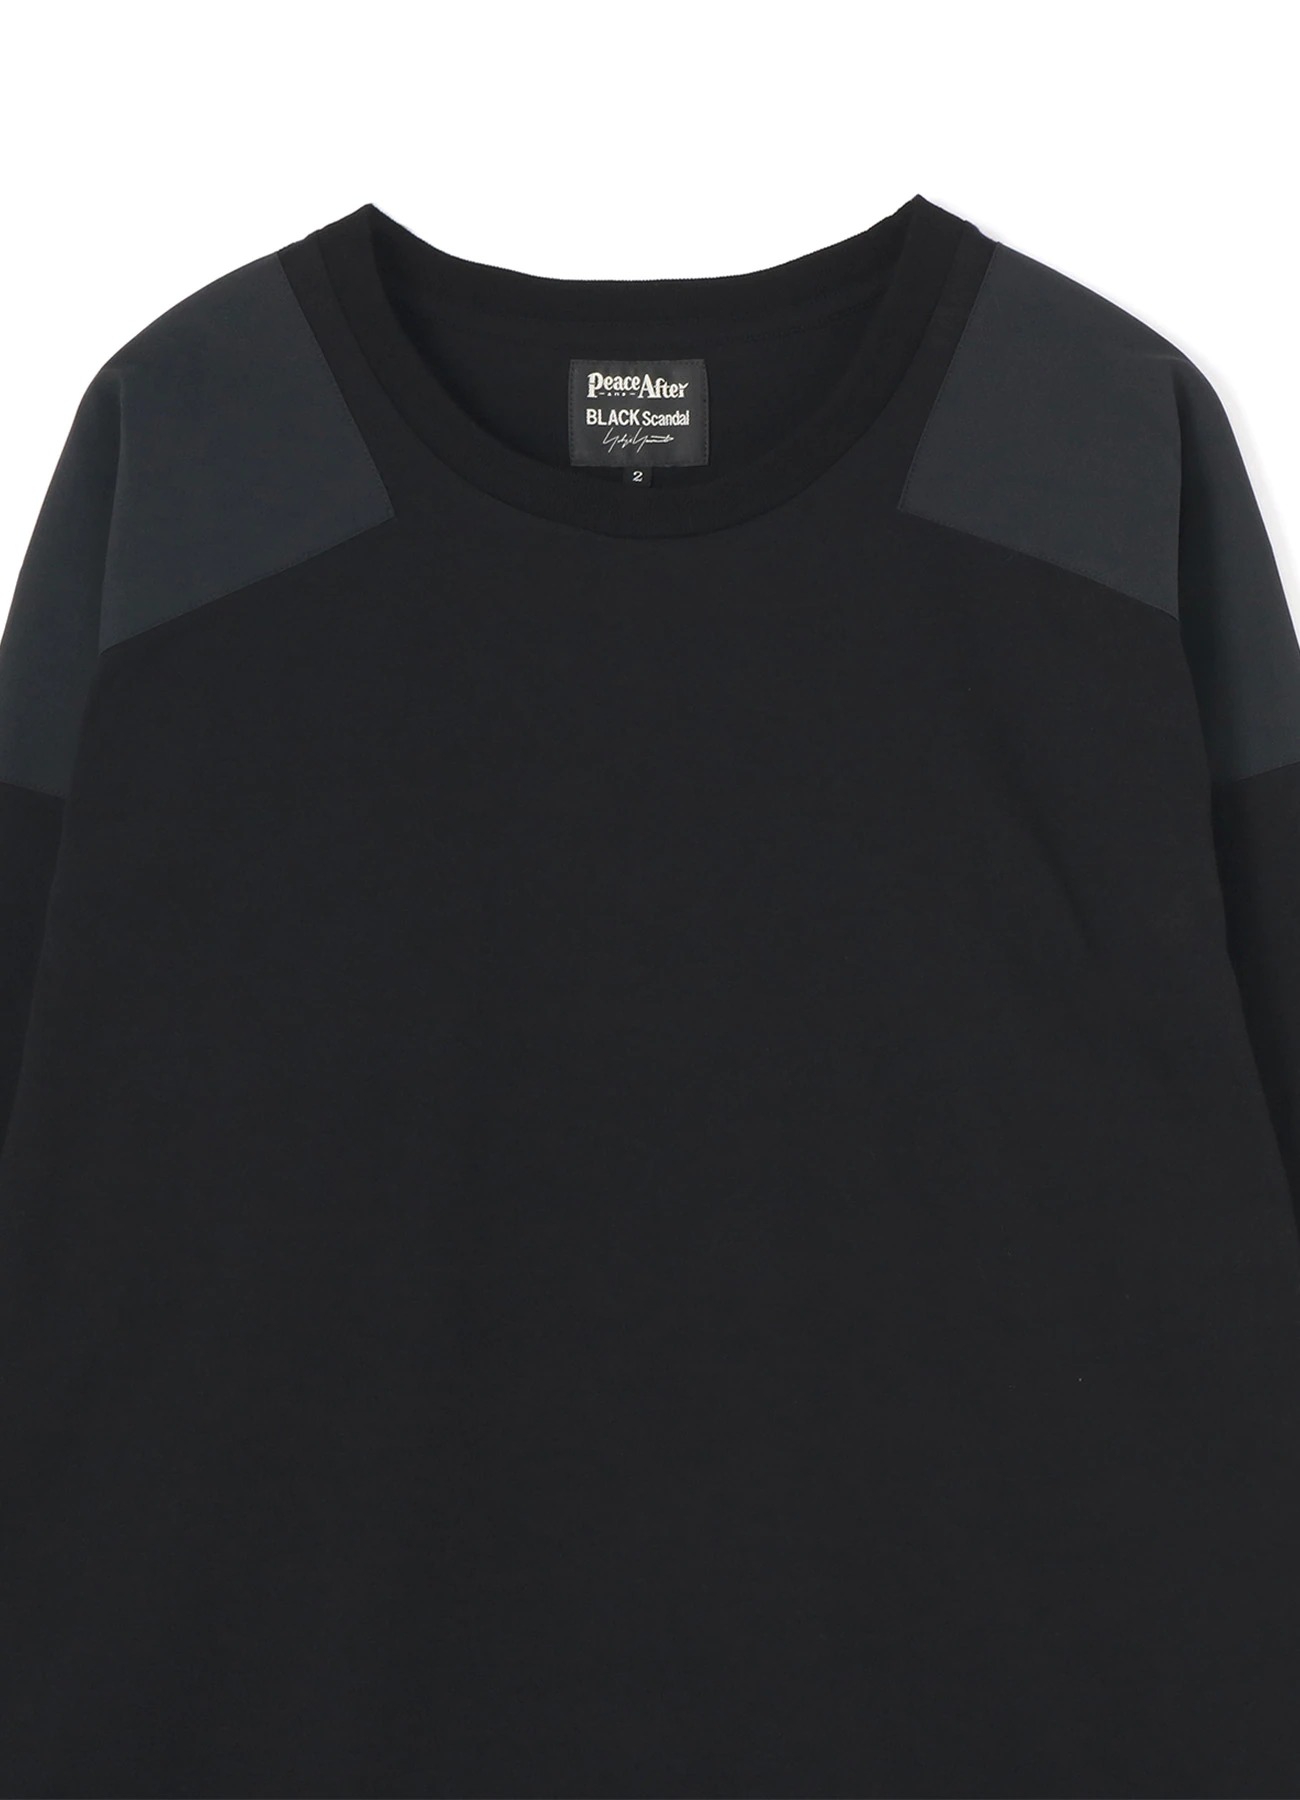 Yohji Yamamoto Black Scandal｜PEACE AND AFTER ROUND NECK SHOULDER PATCH LONG SLEEVES TEE HG-T93-999-1 US＄365